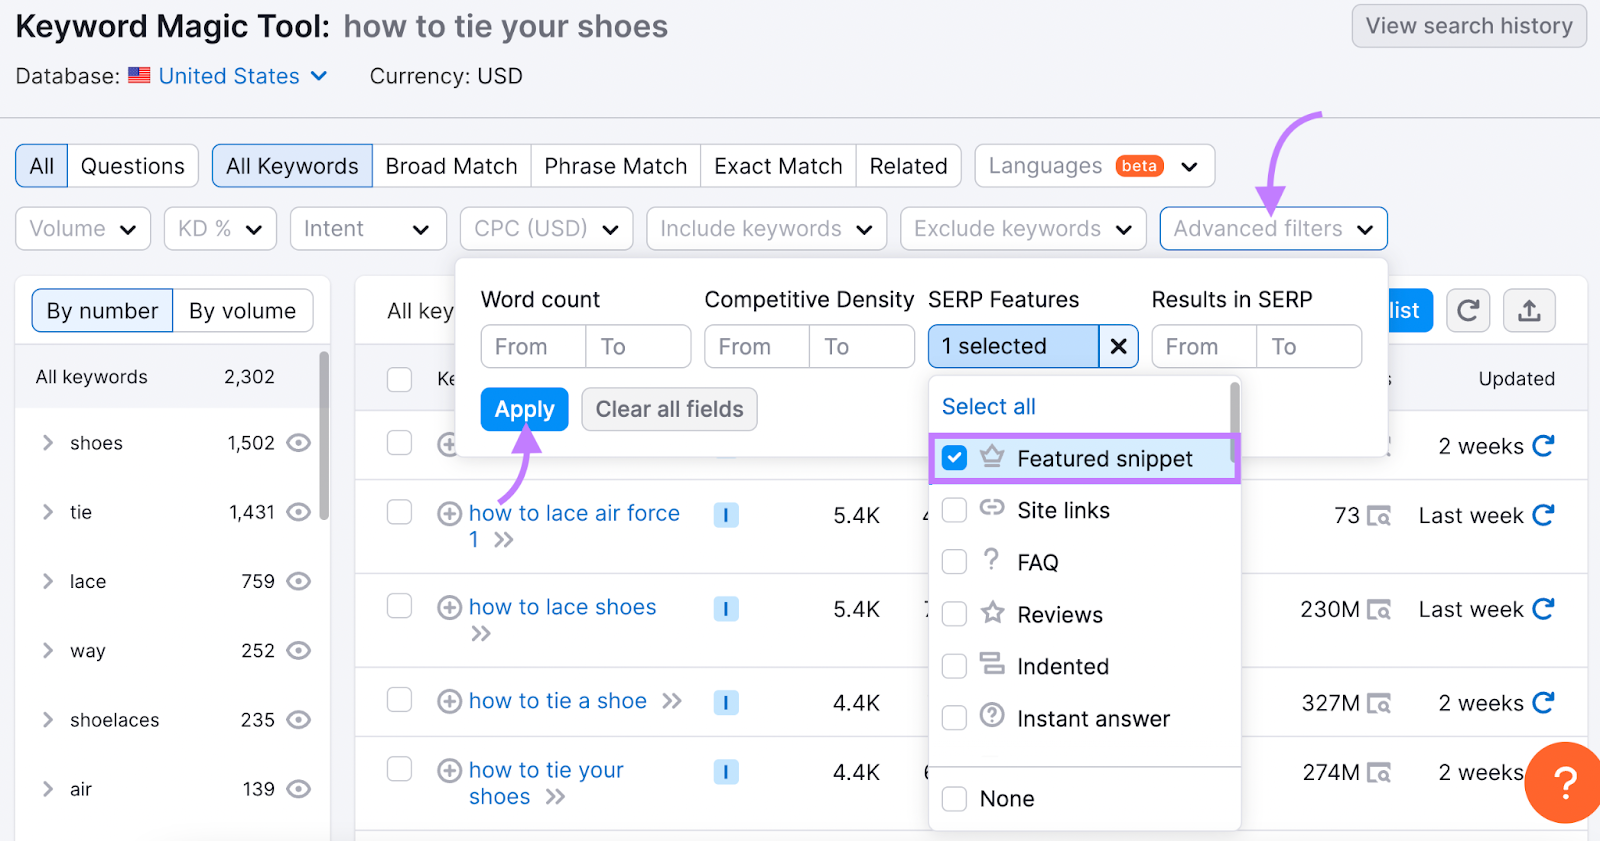 "Featured snippet" box selected from the advanced filters in Keyword Magic Tool